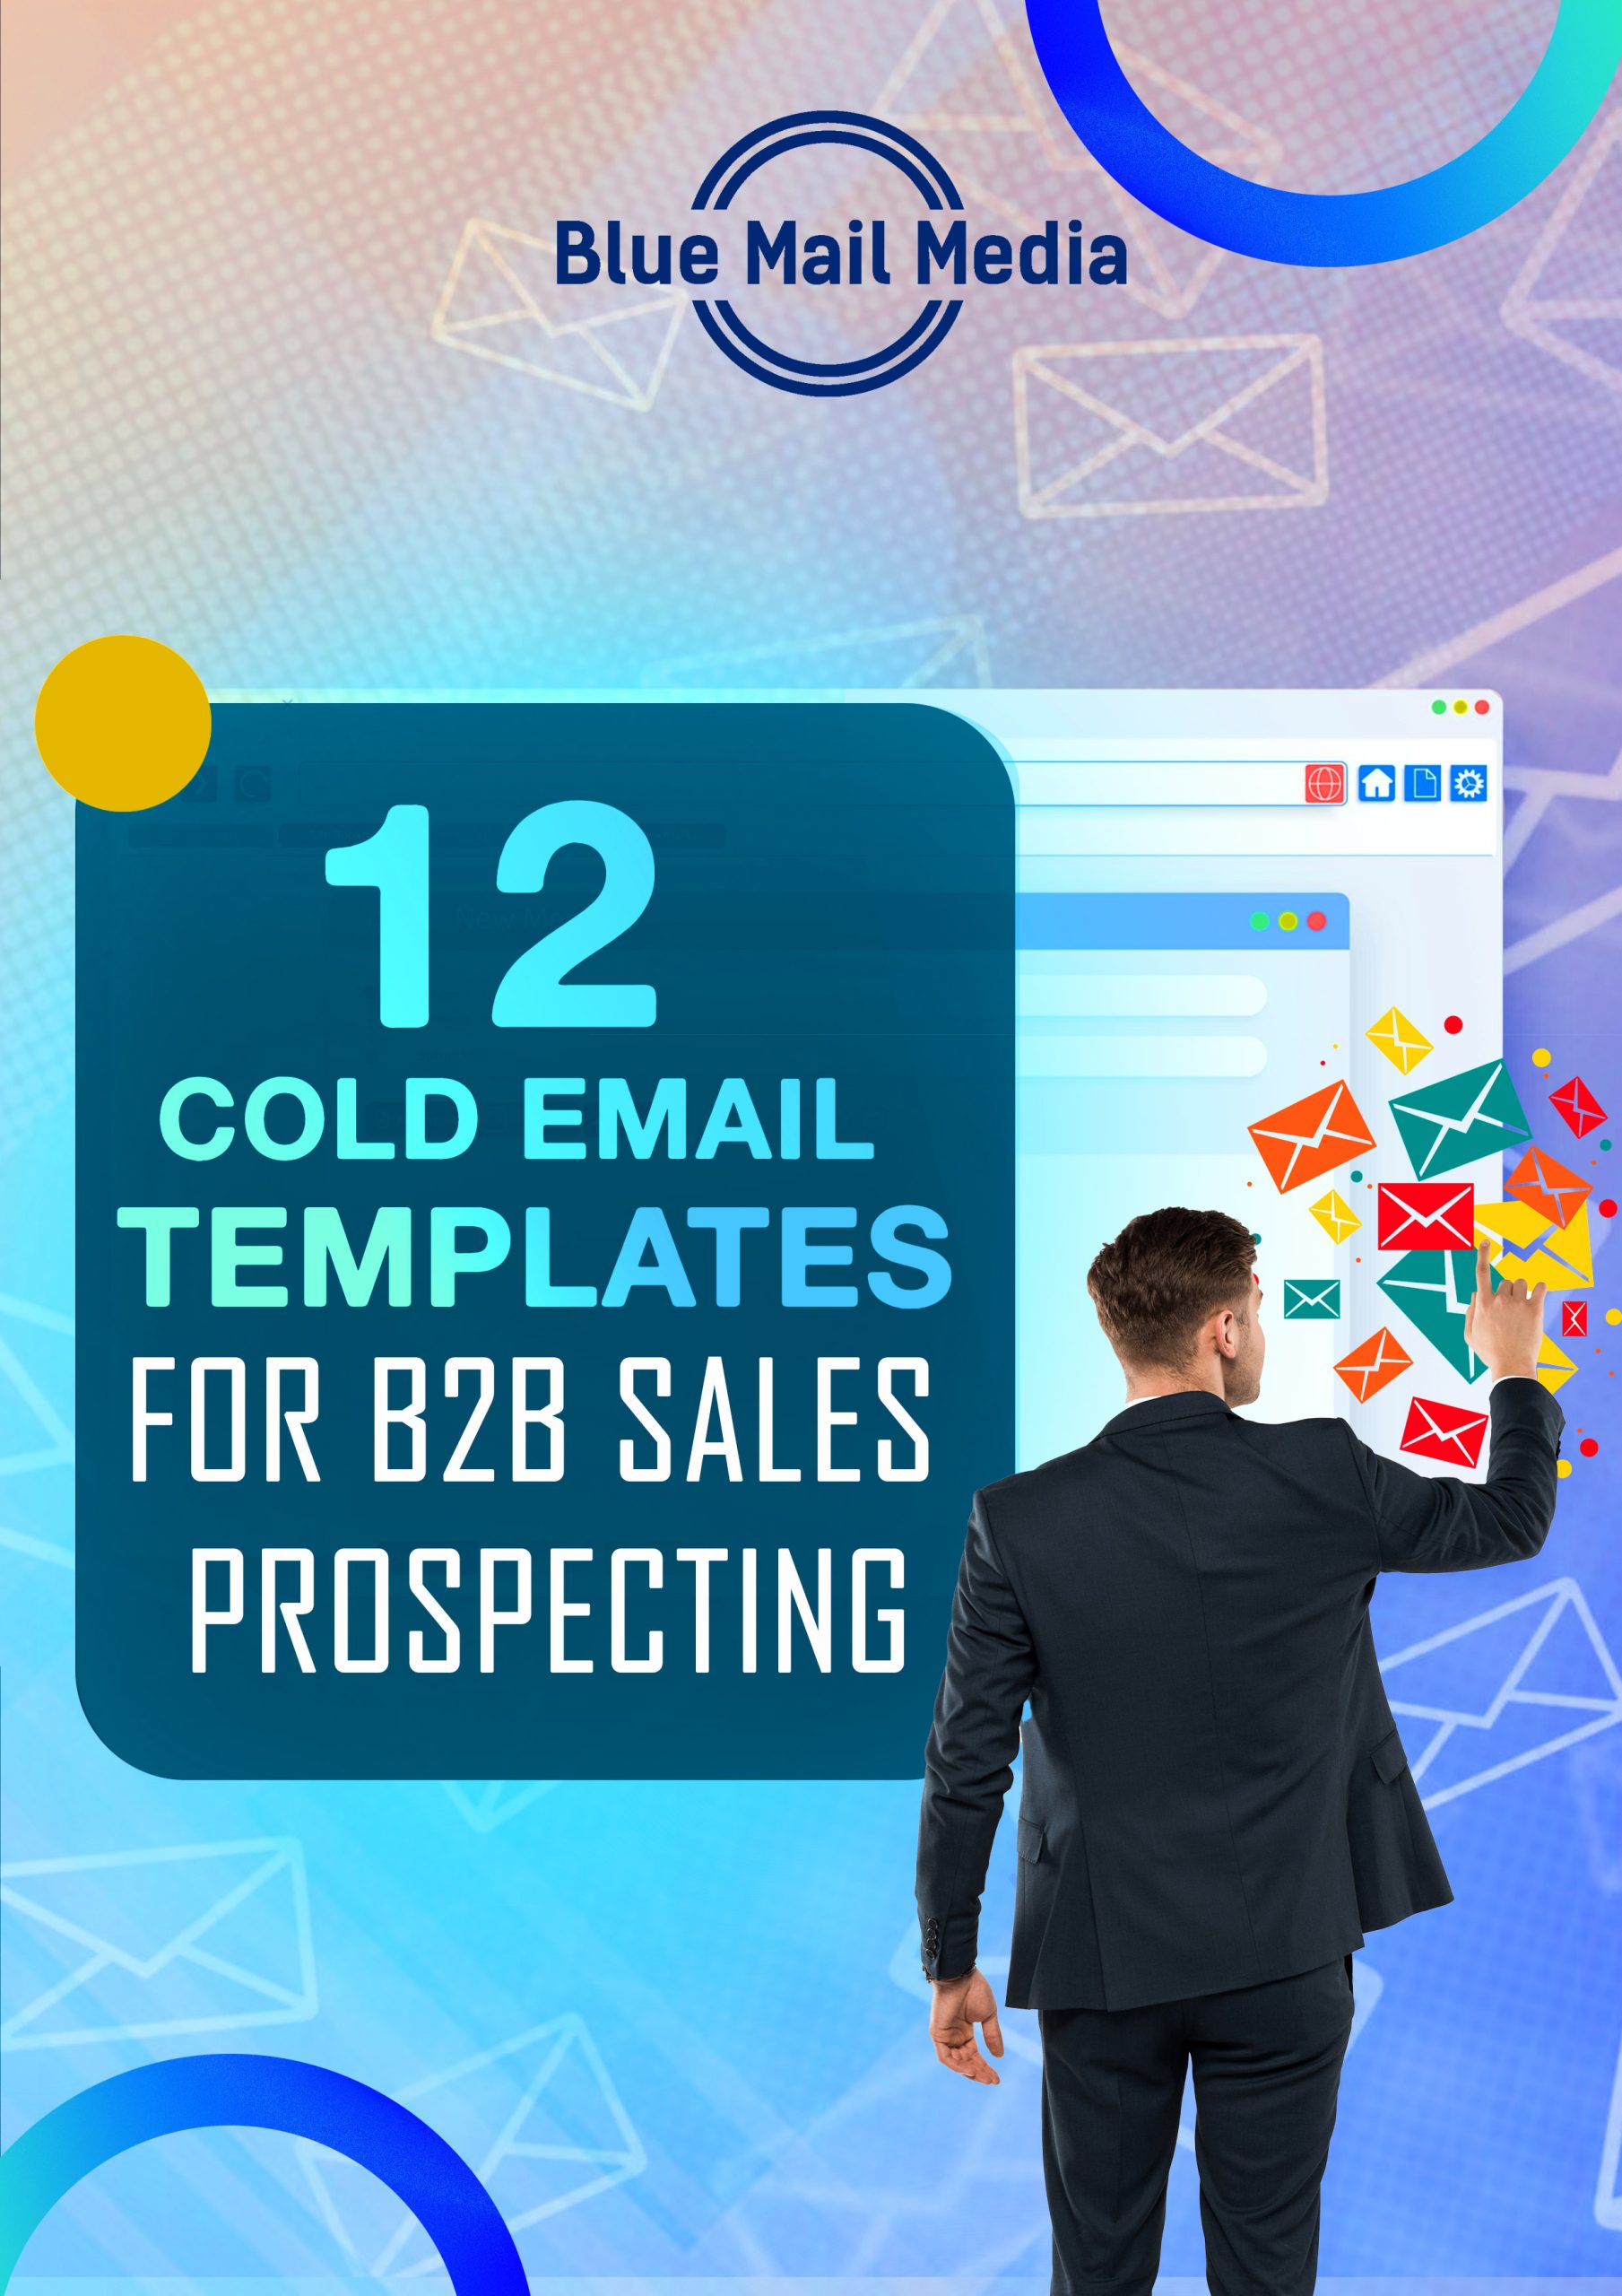 Email templates to transform your B2B pitches